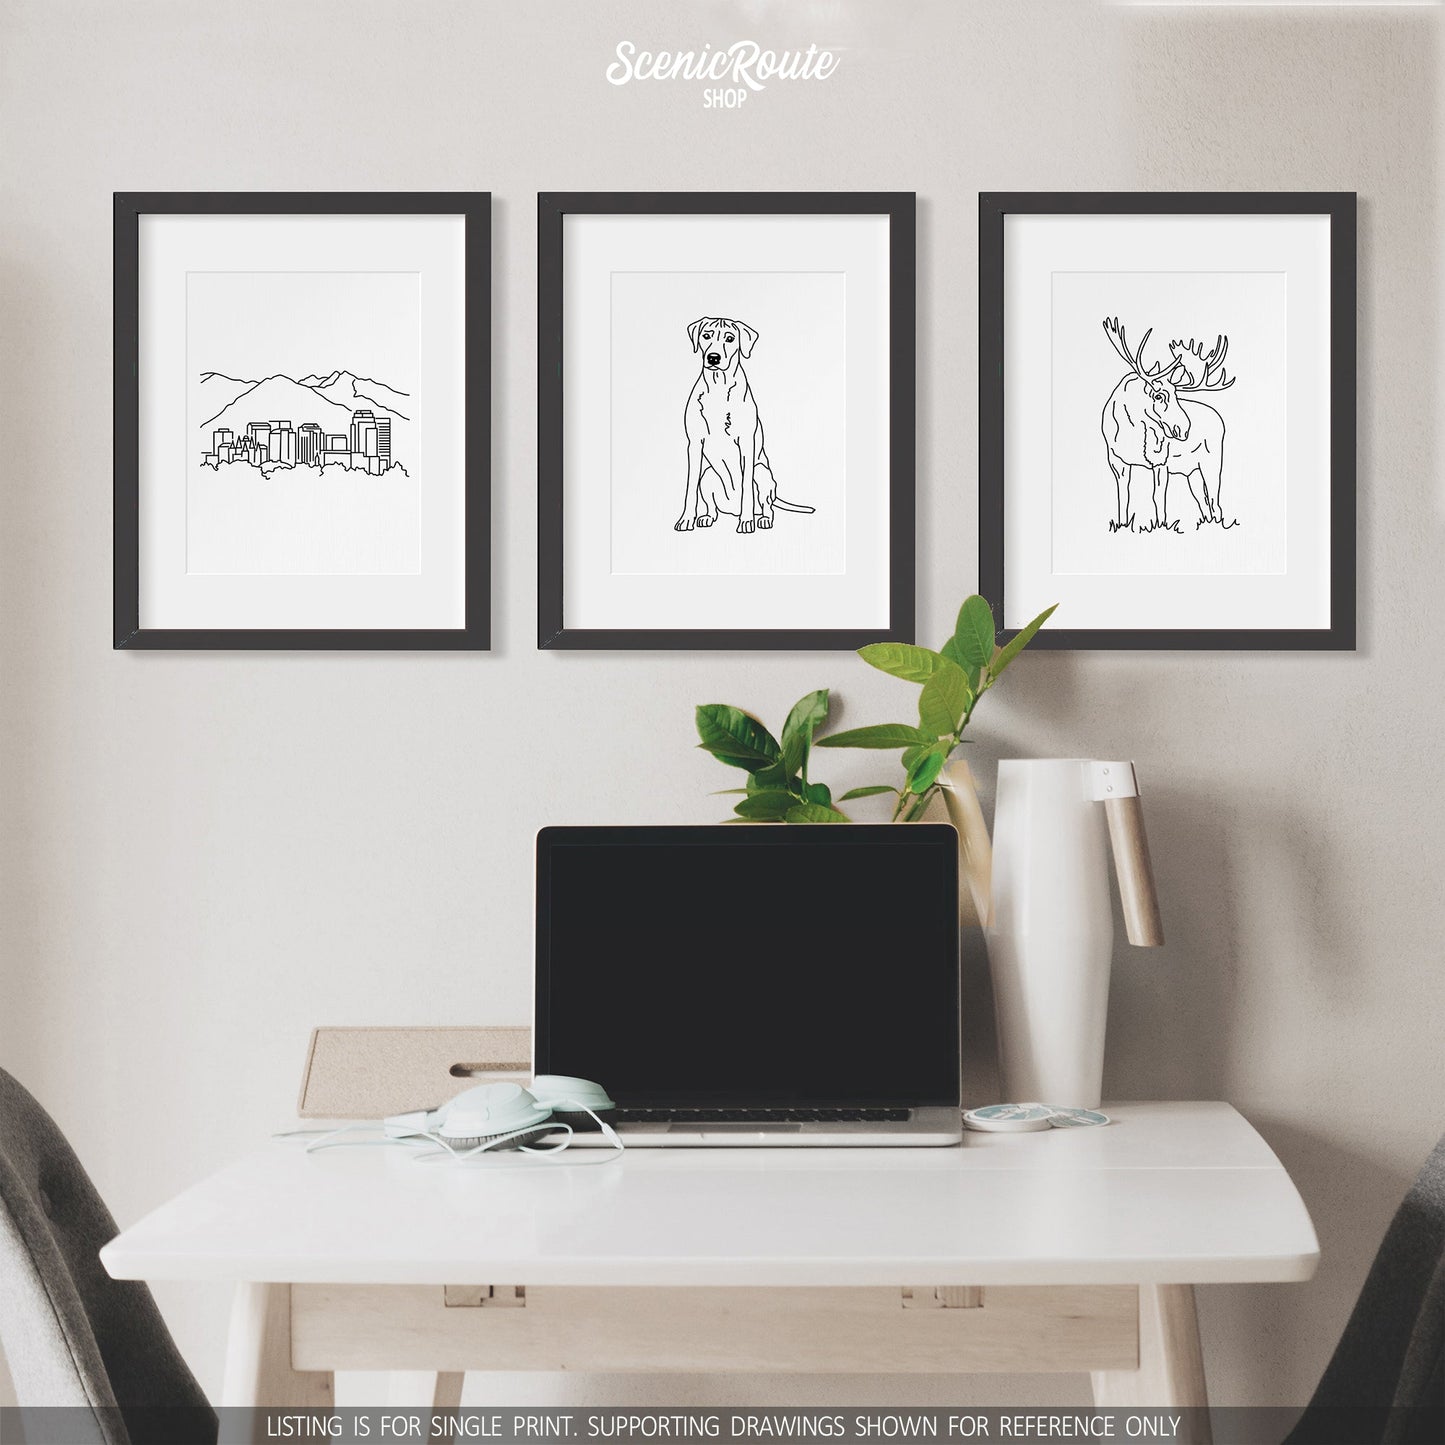 A group of three framed drawings on a white wall above a table with a laptop. The line art drawings include the Salt Lake City Skyline, a Rhodesian Ridgeback dog, and a Moose